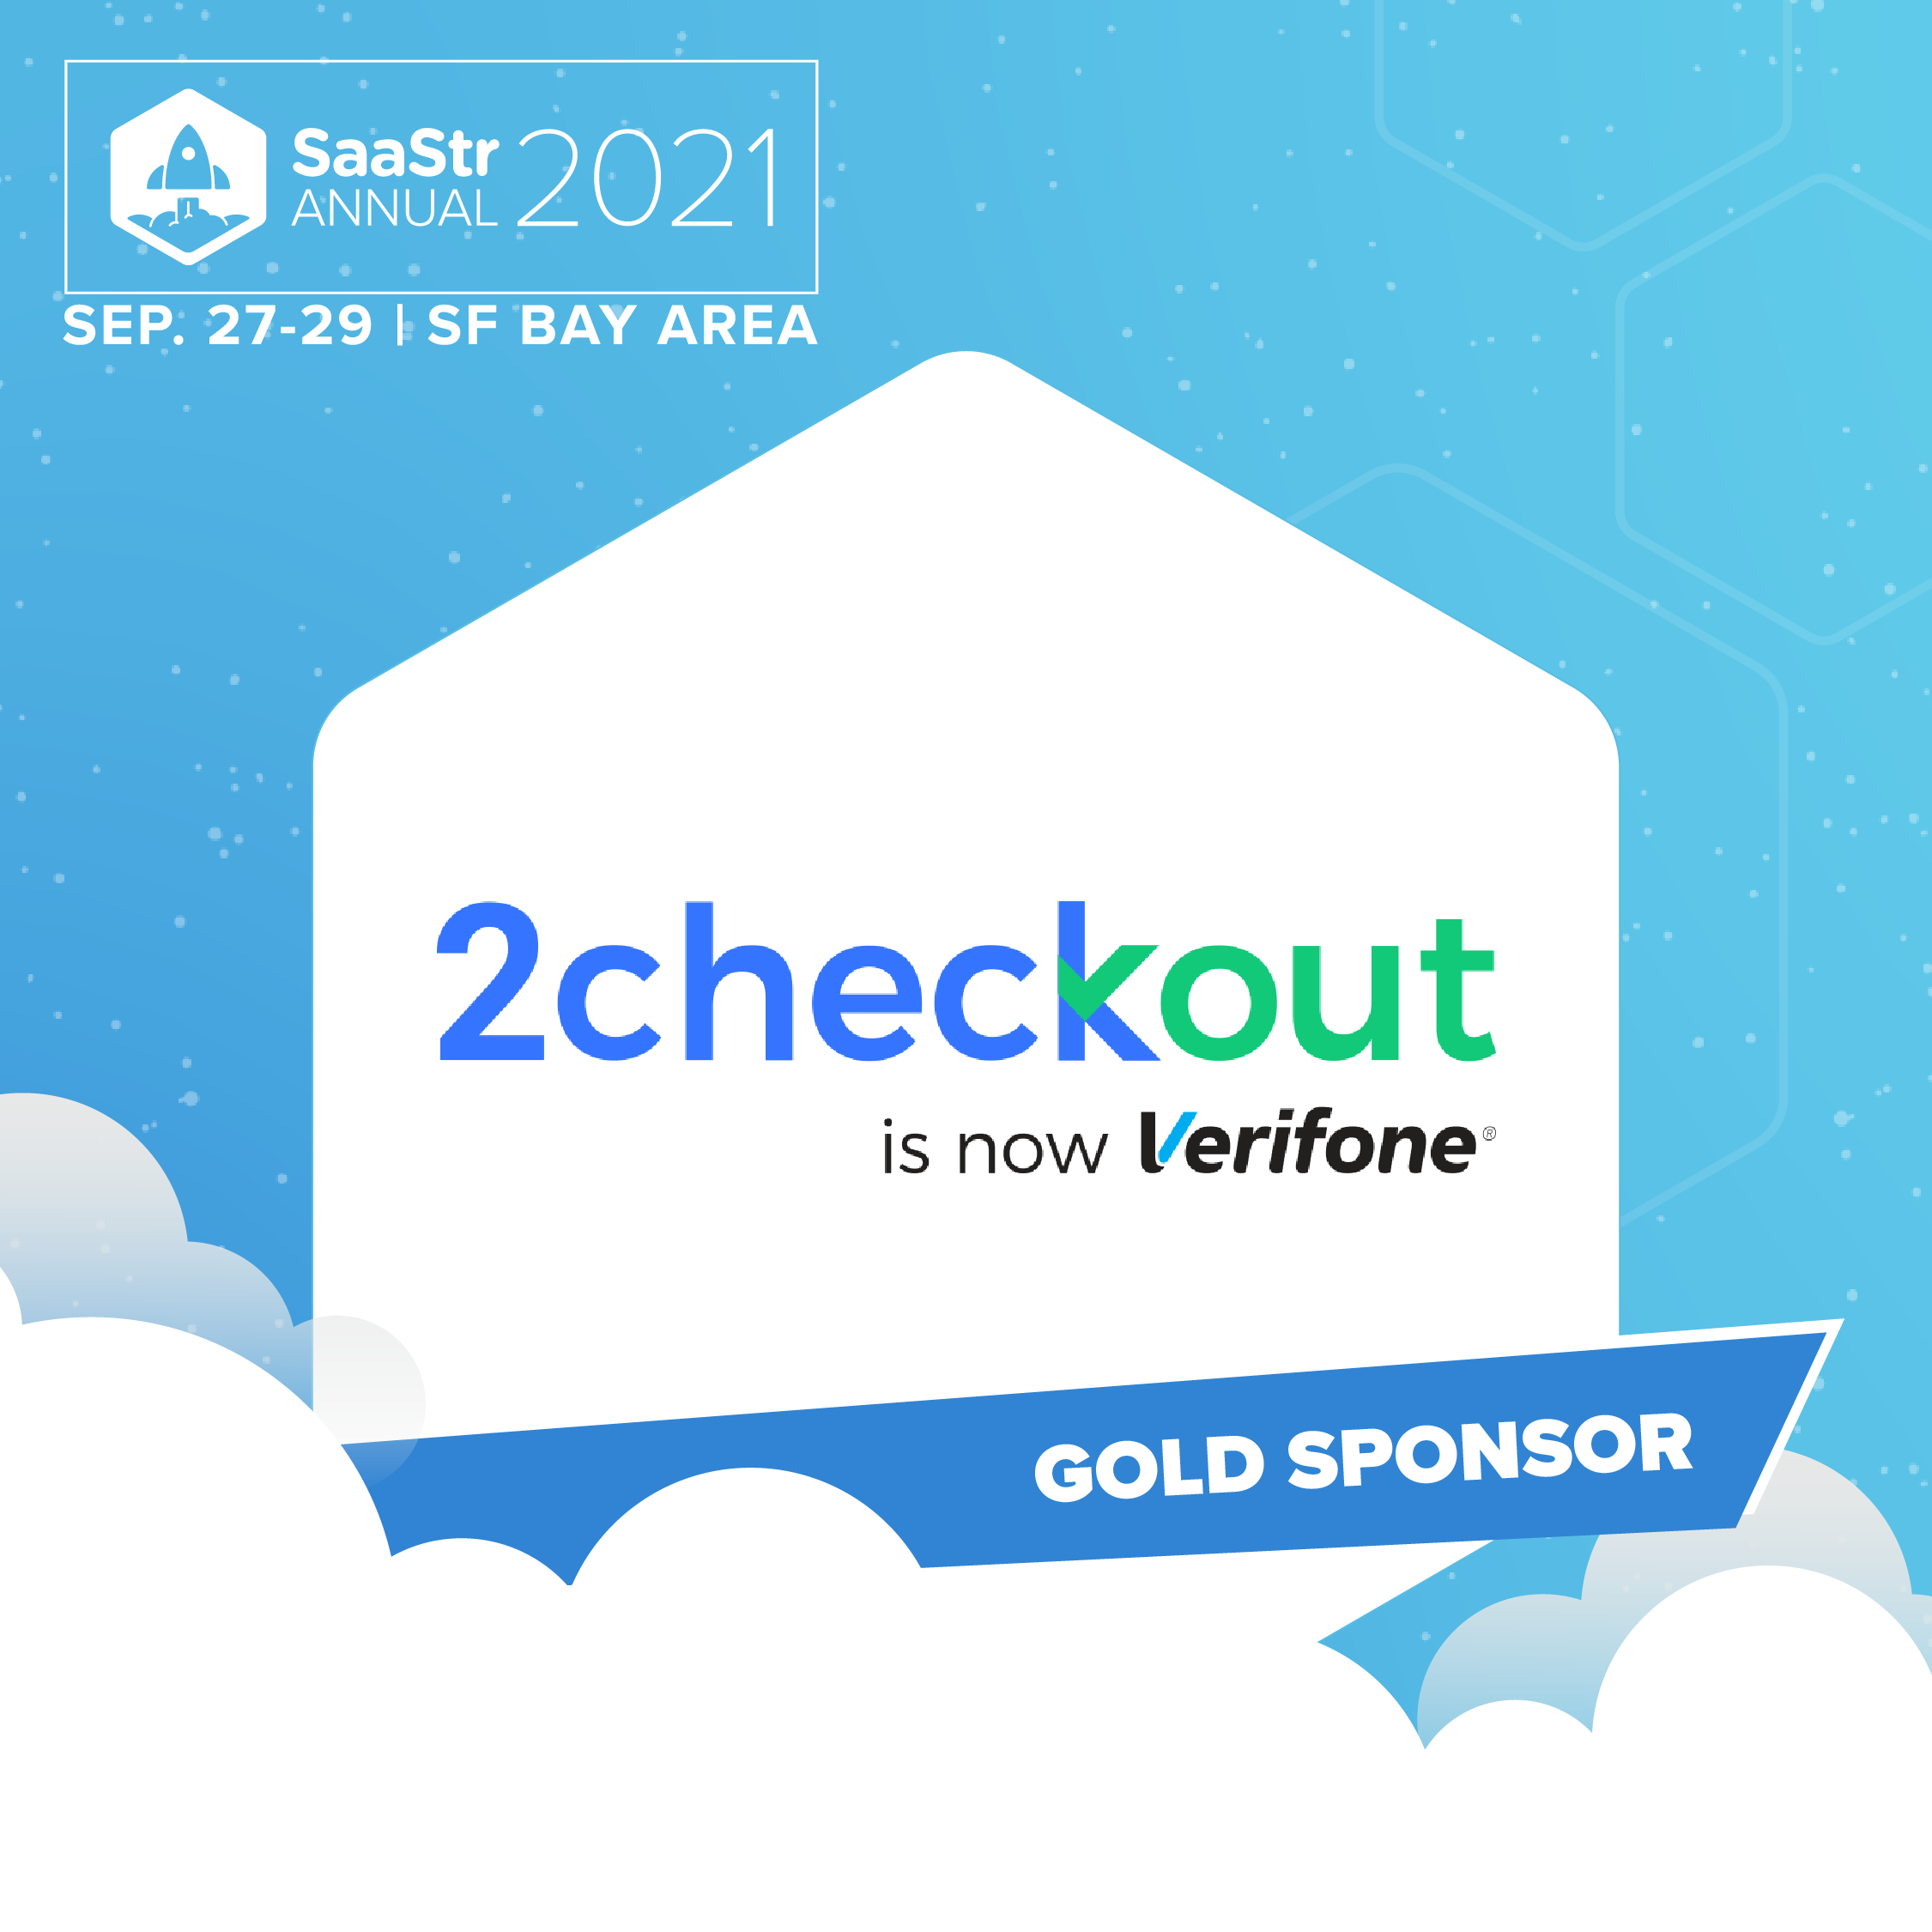 2Checkout SaaStr Annual 2021